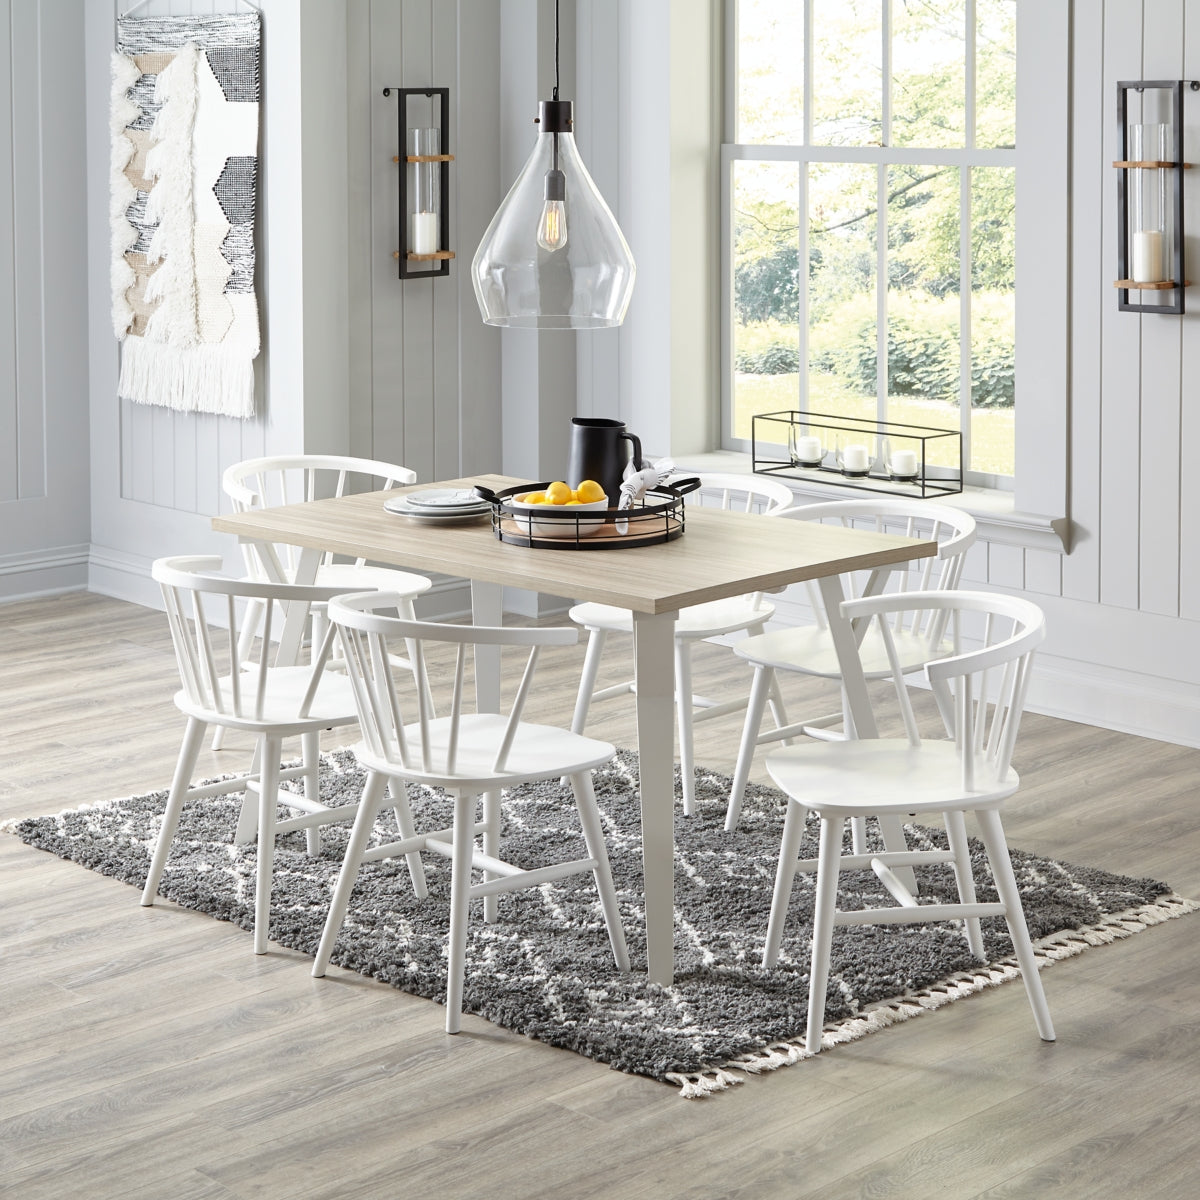 Grannen Dining Table and 6 Chairs - furniture place usa